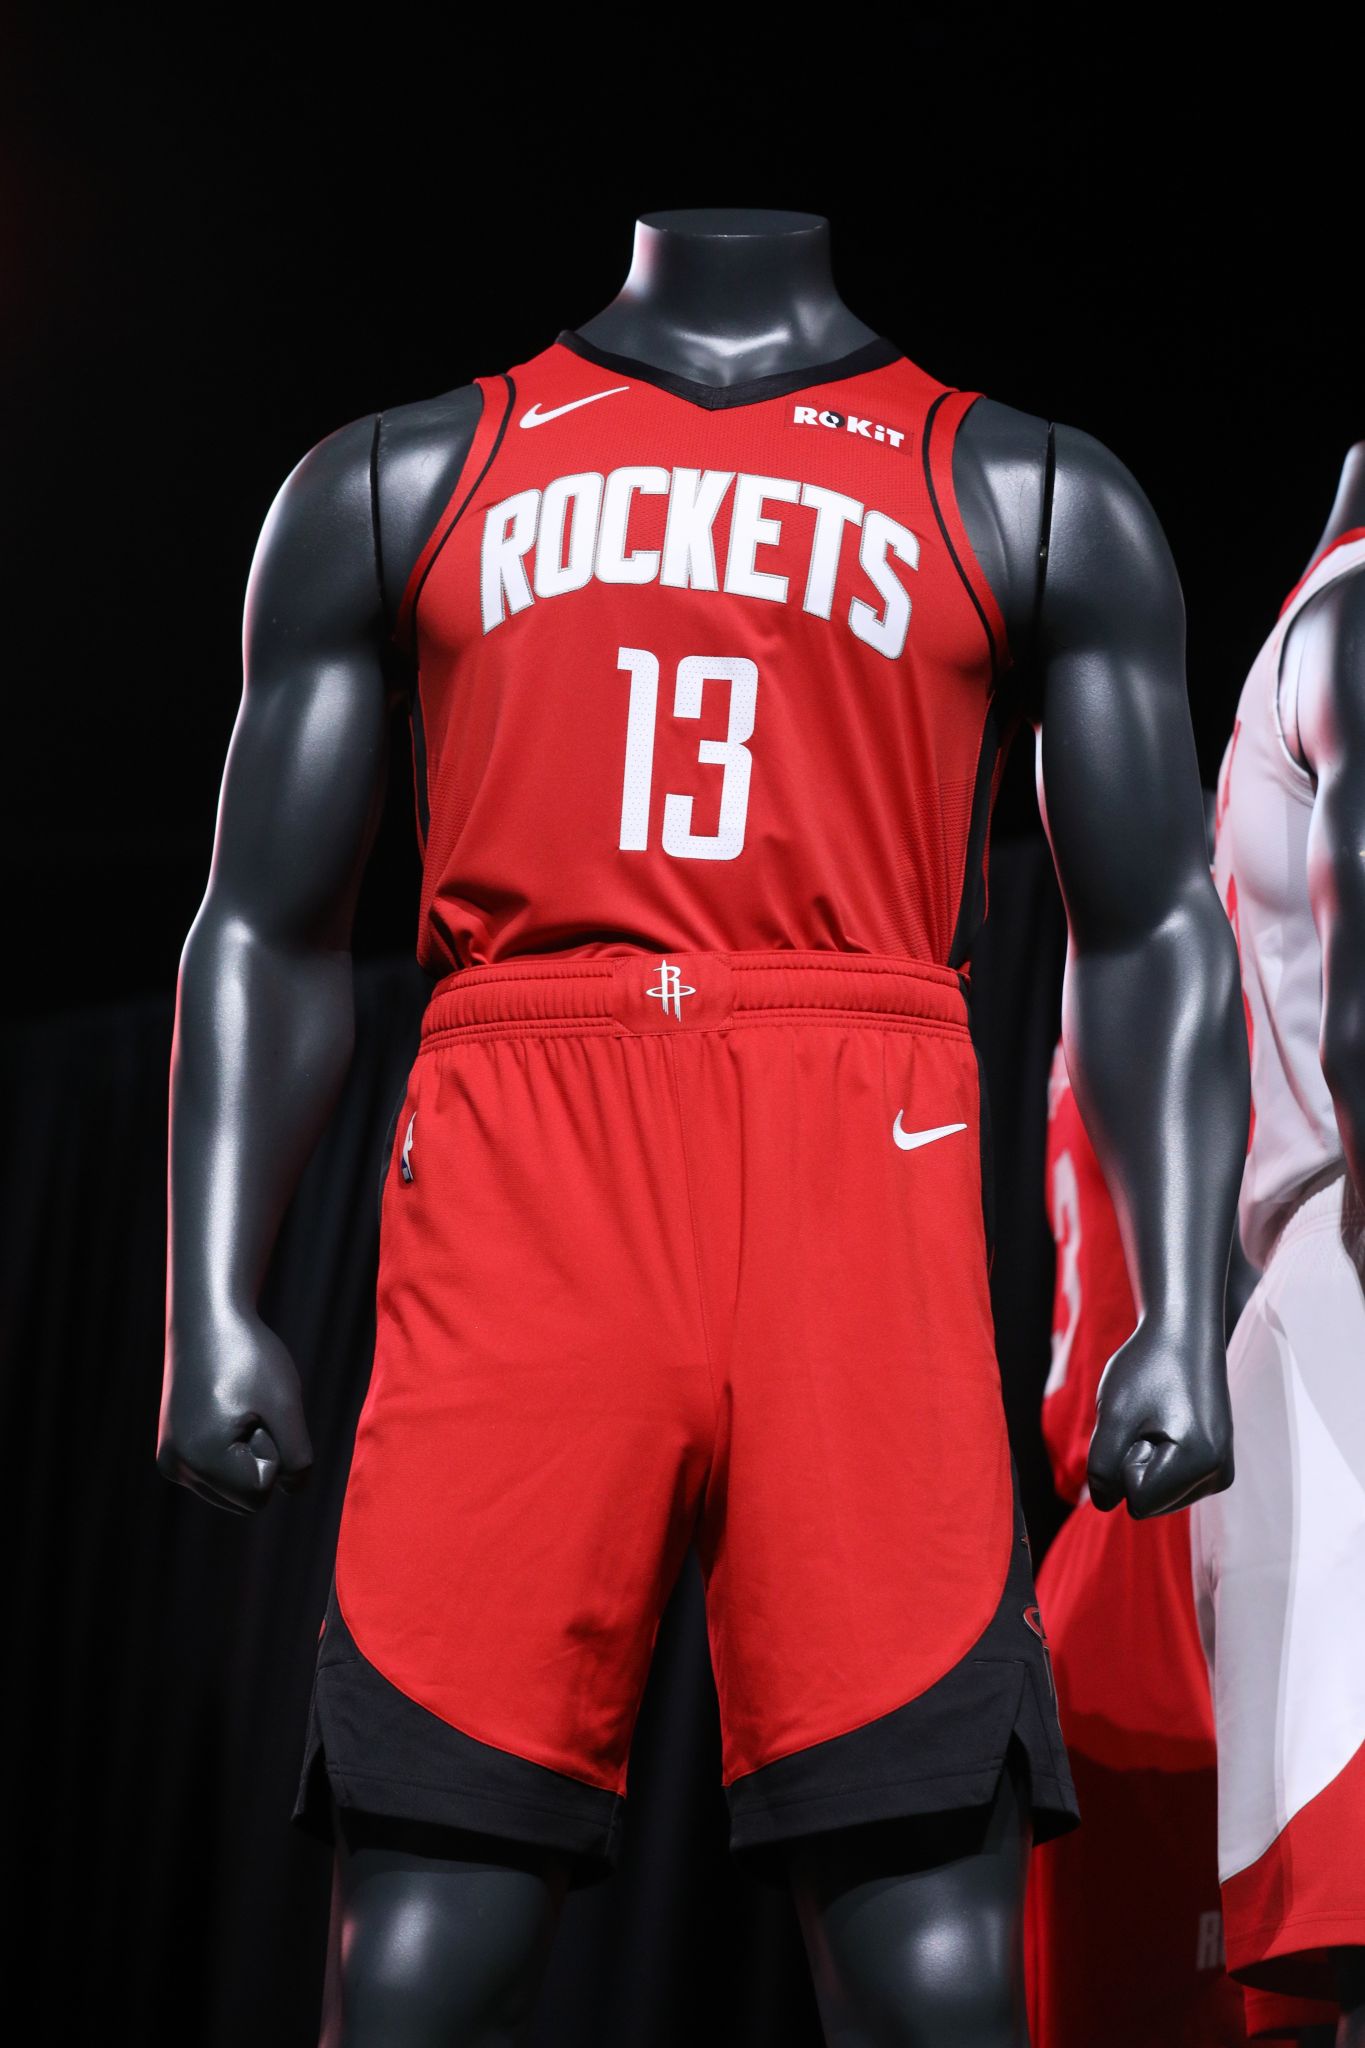 With Rockets unveiling new uniforms, here's how Rockets jerseys have changed  in the past